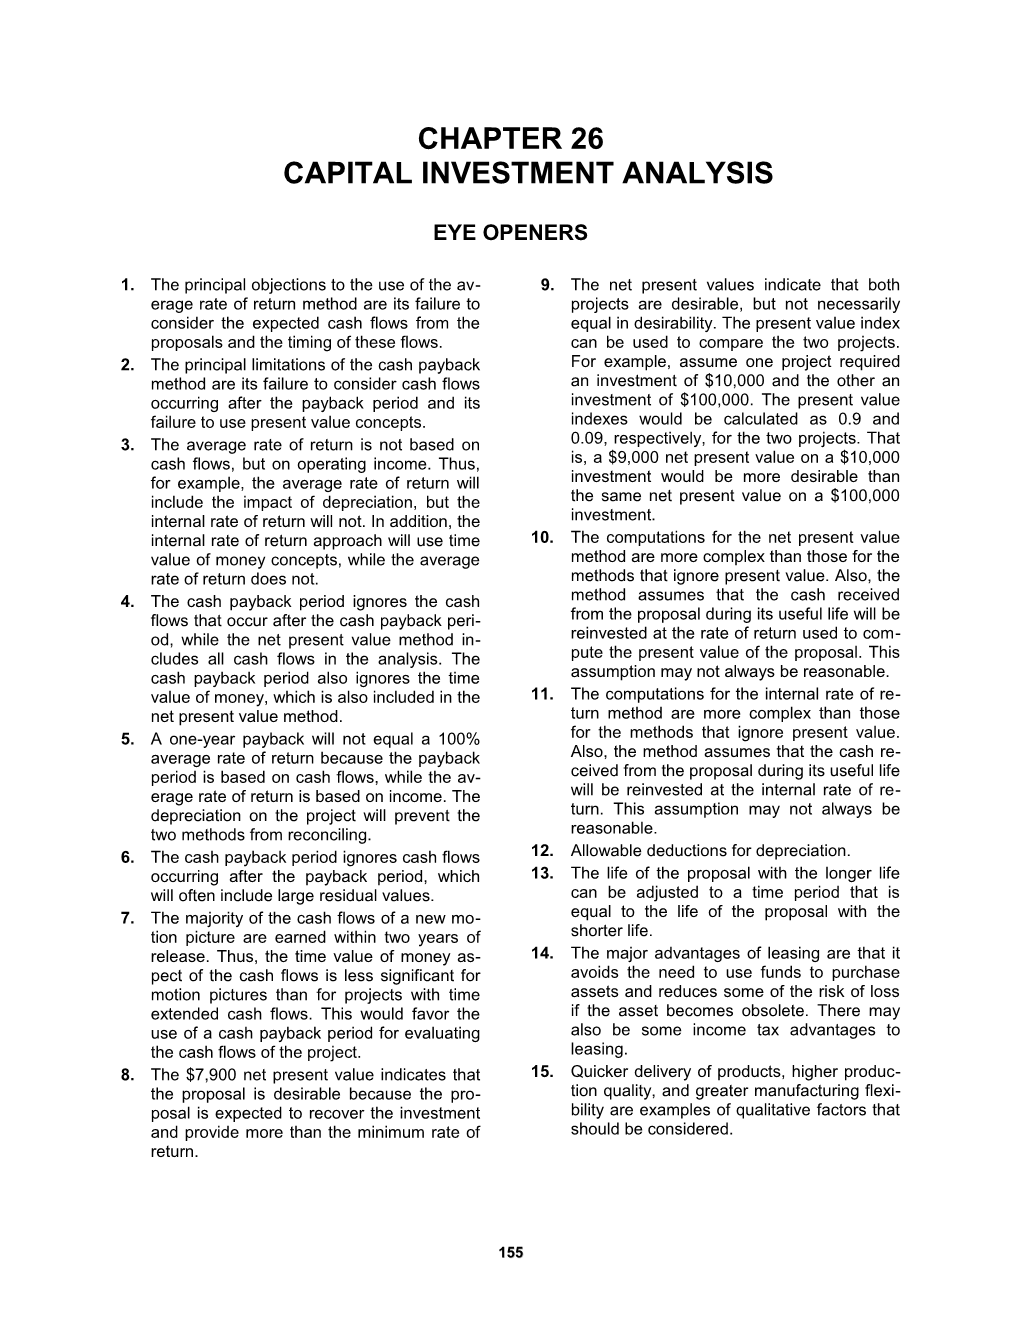 Chapter 26Capital Investment Analysis